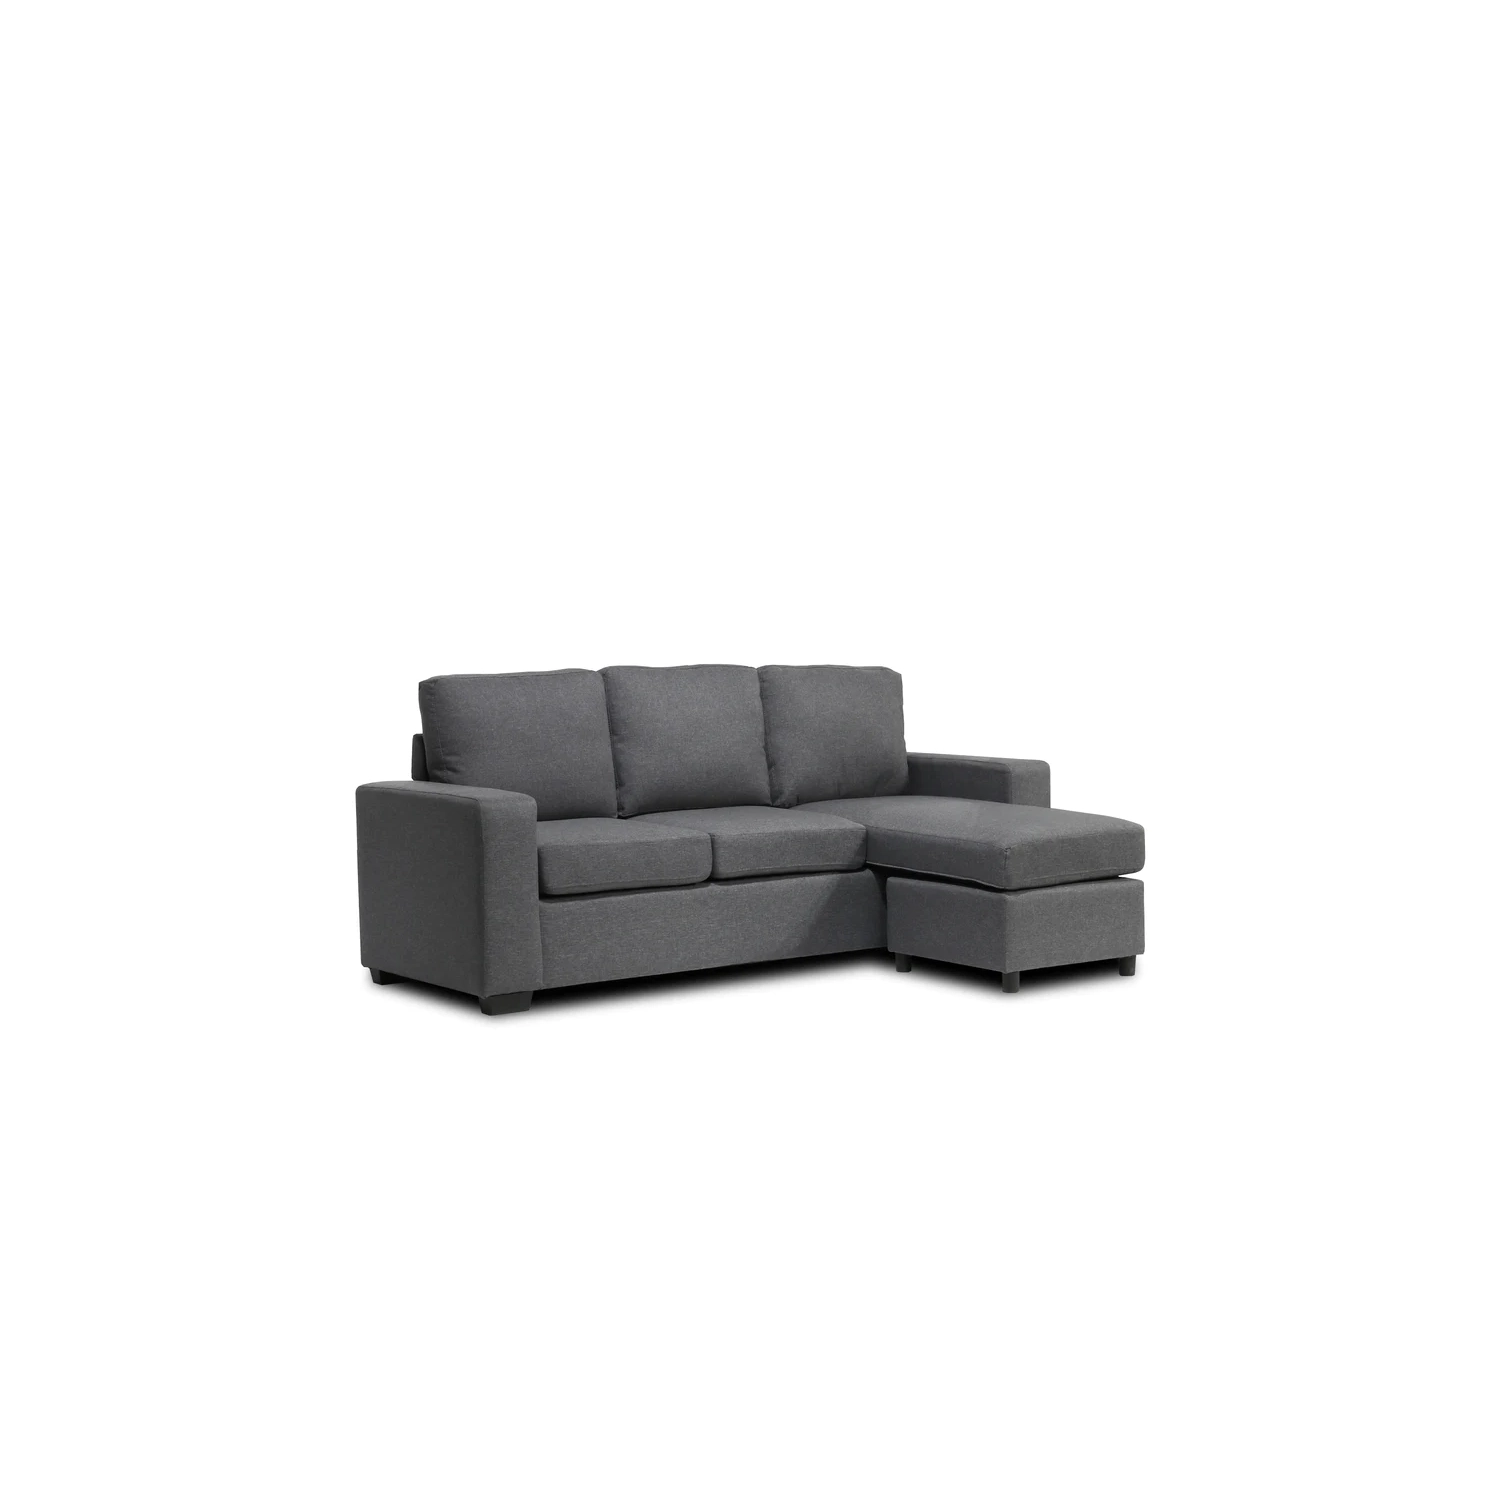 Infinite Imports – 6000 Reversible Sectional Sofa With 2 Free Throw Pillows (Grey)